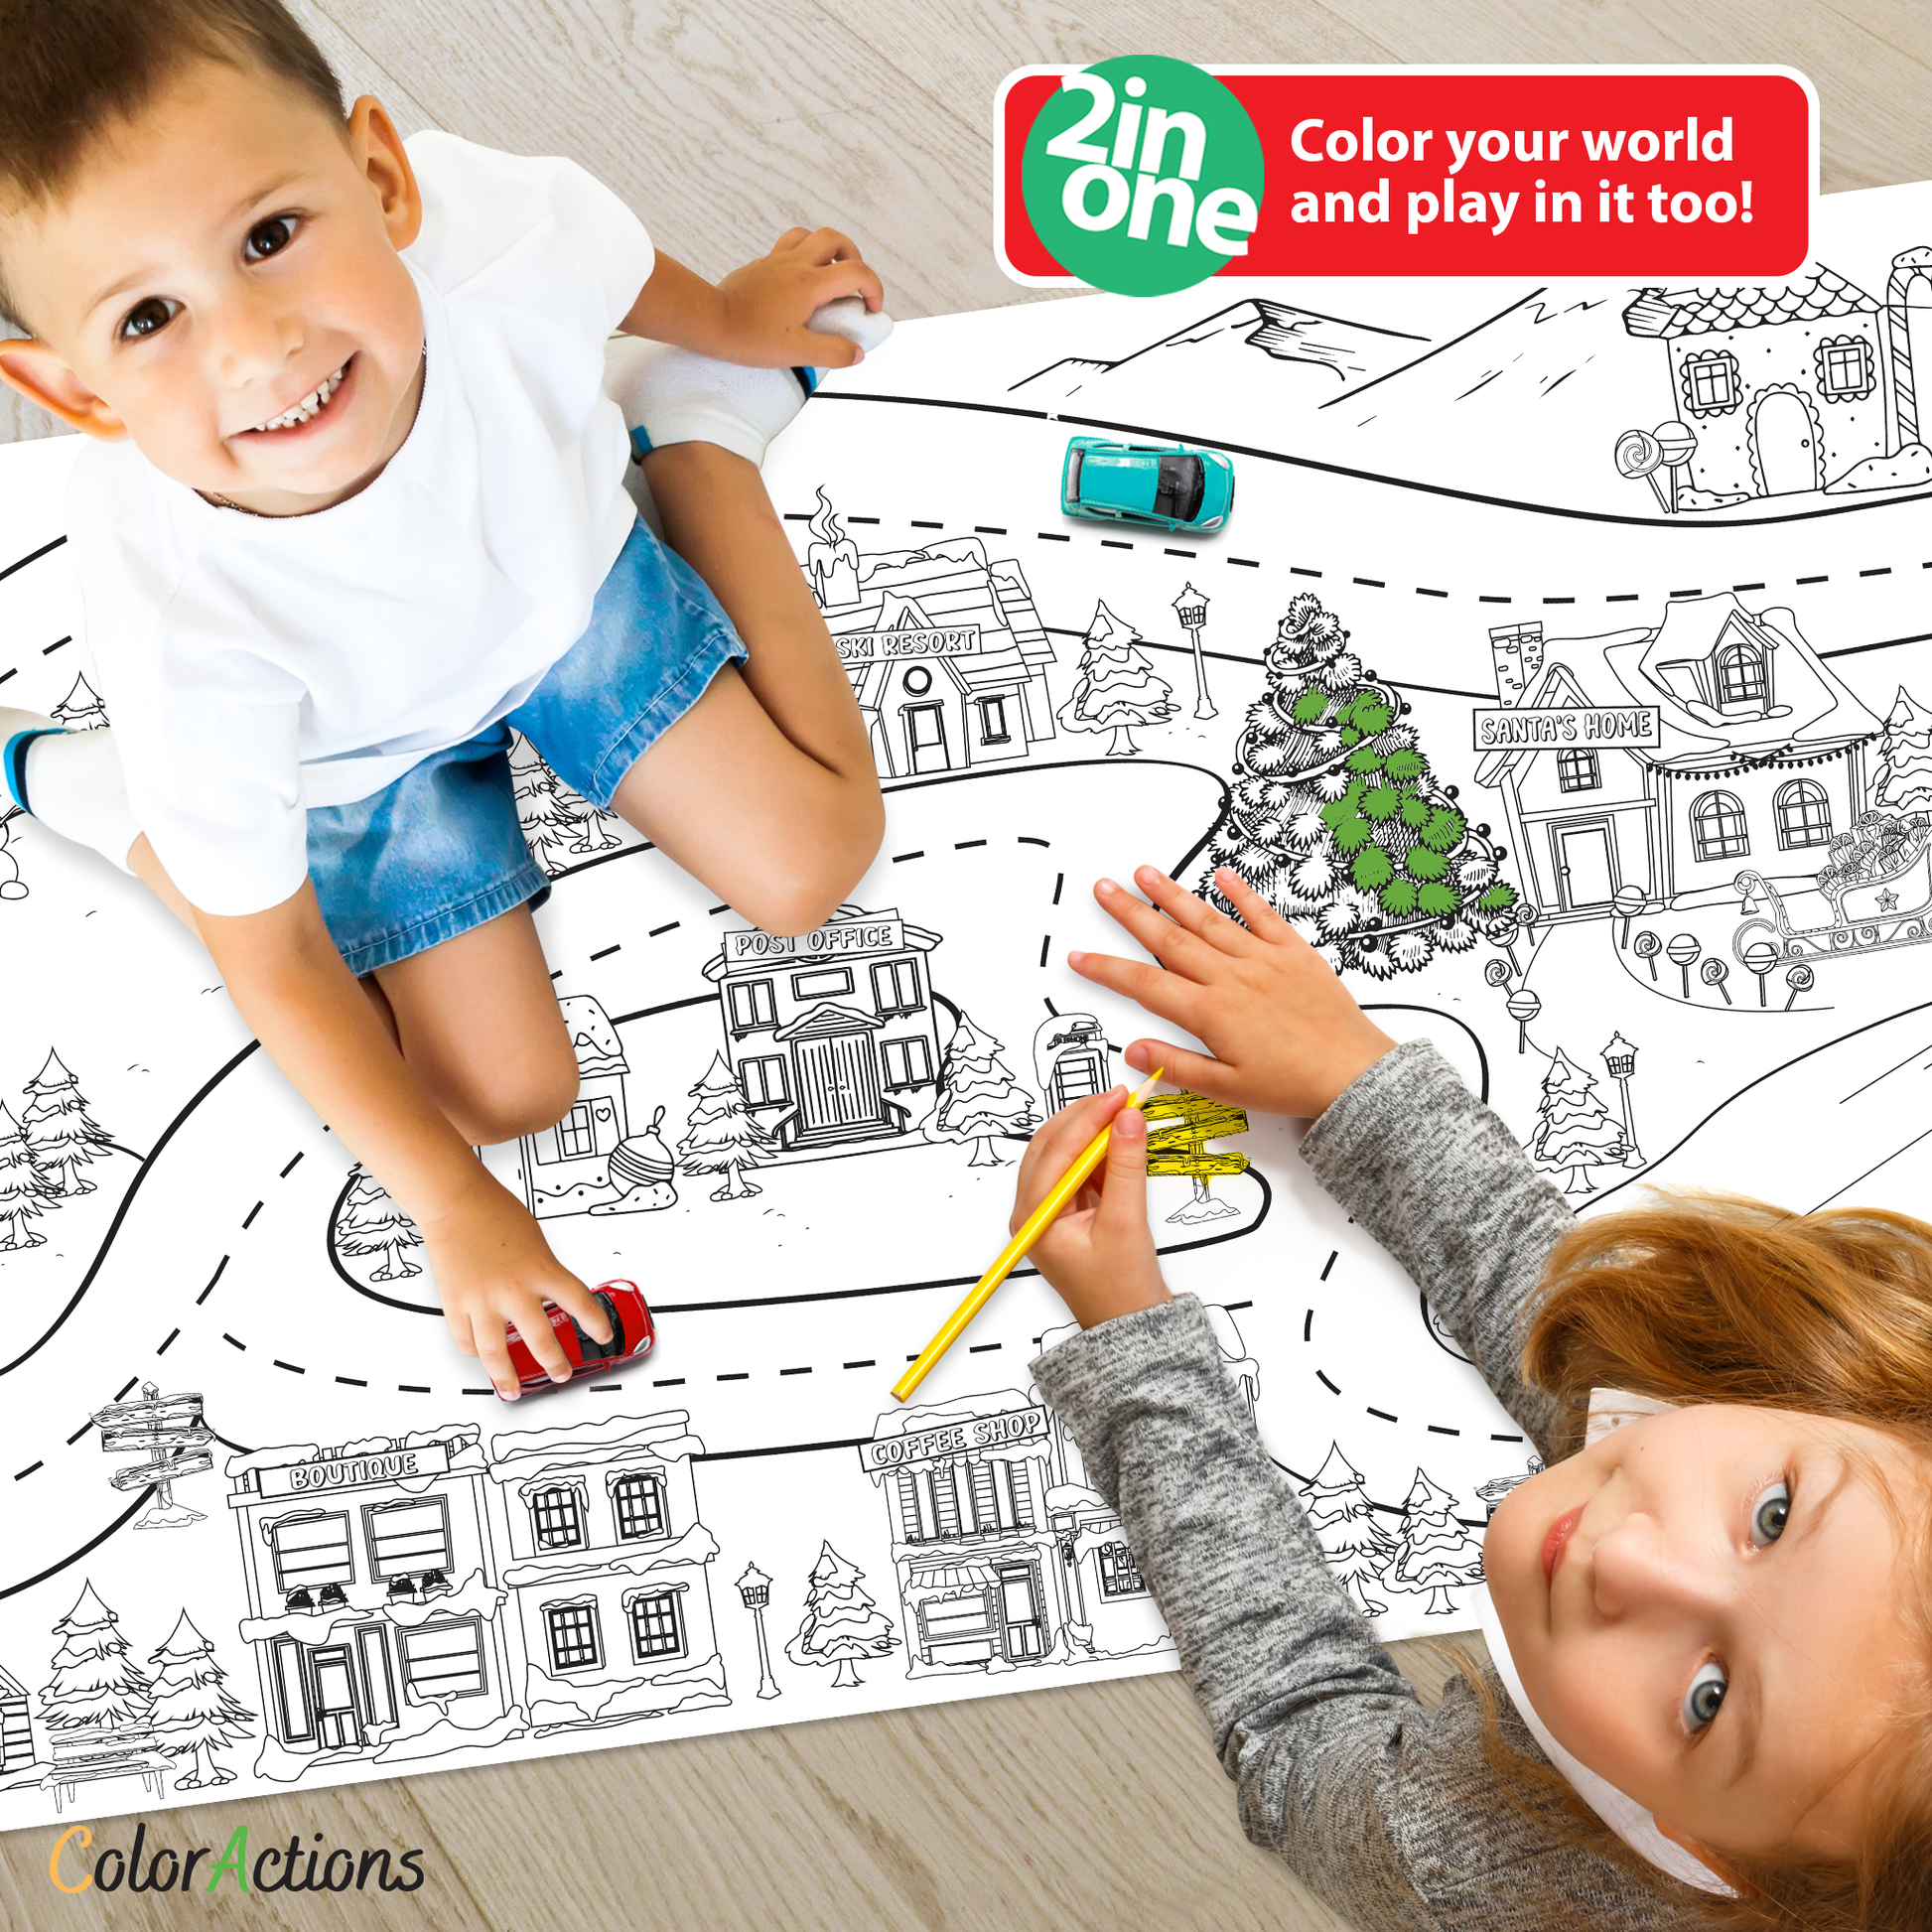 SALE Christmas Tree Giant Coloring Poster by Omy – Mochi Kids